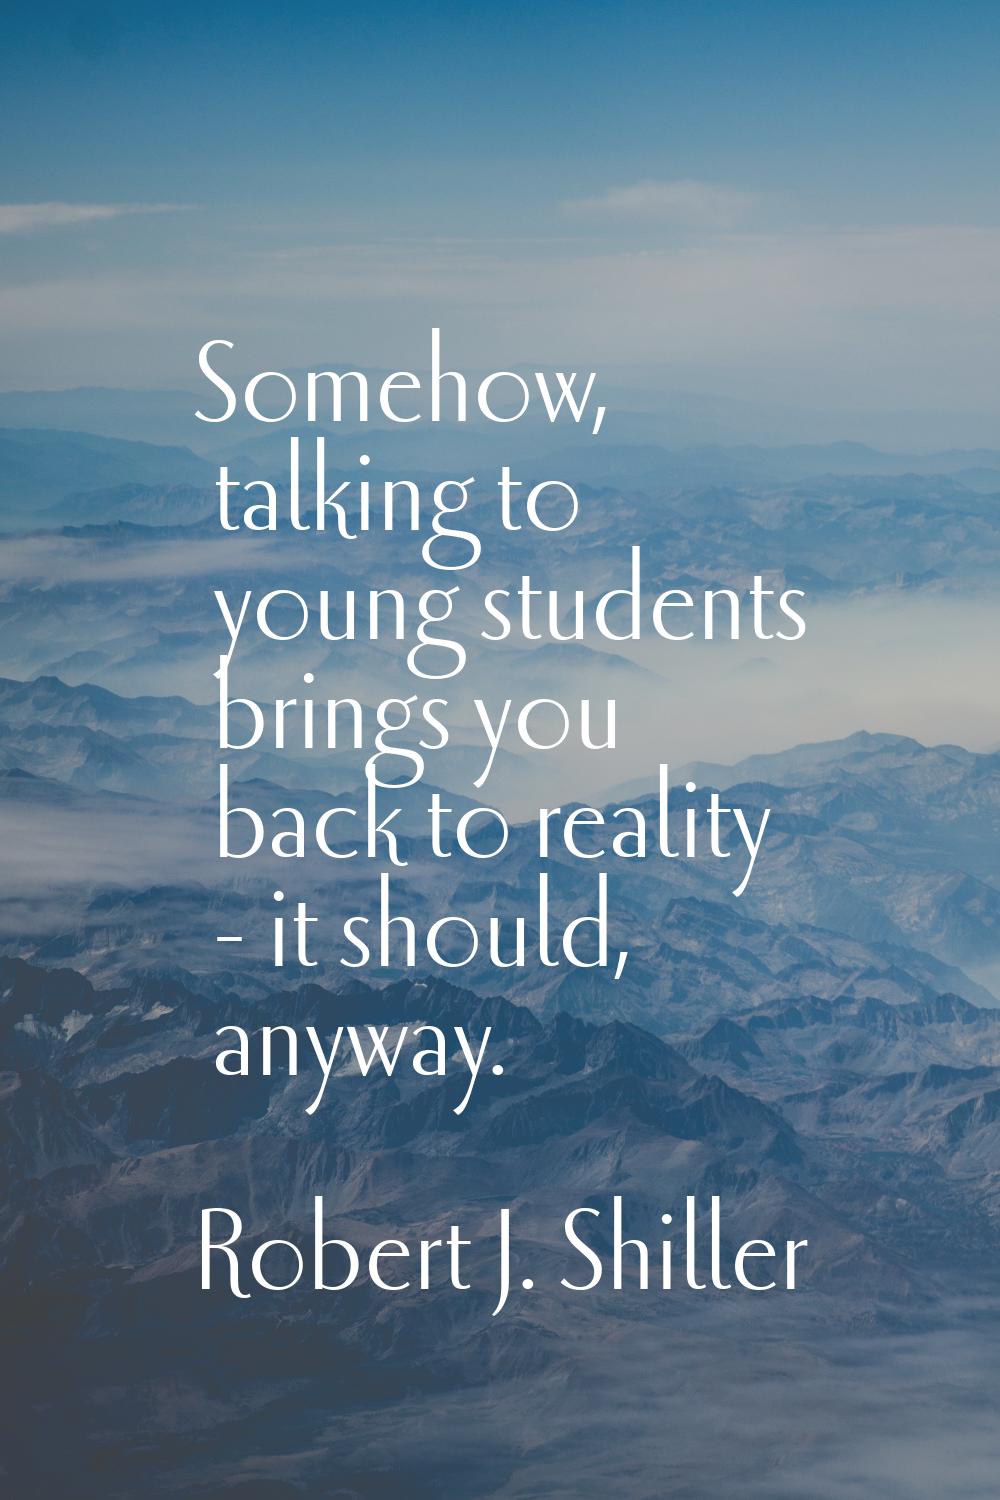 Somehow, talking to young students brings you back to reality - it should, anyway.